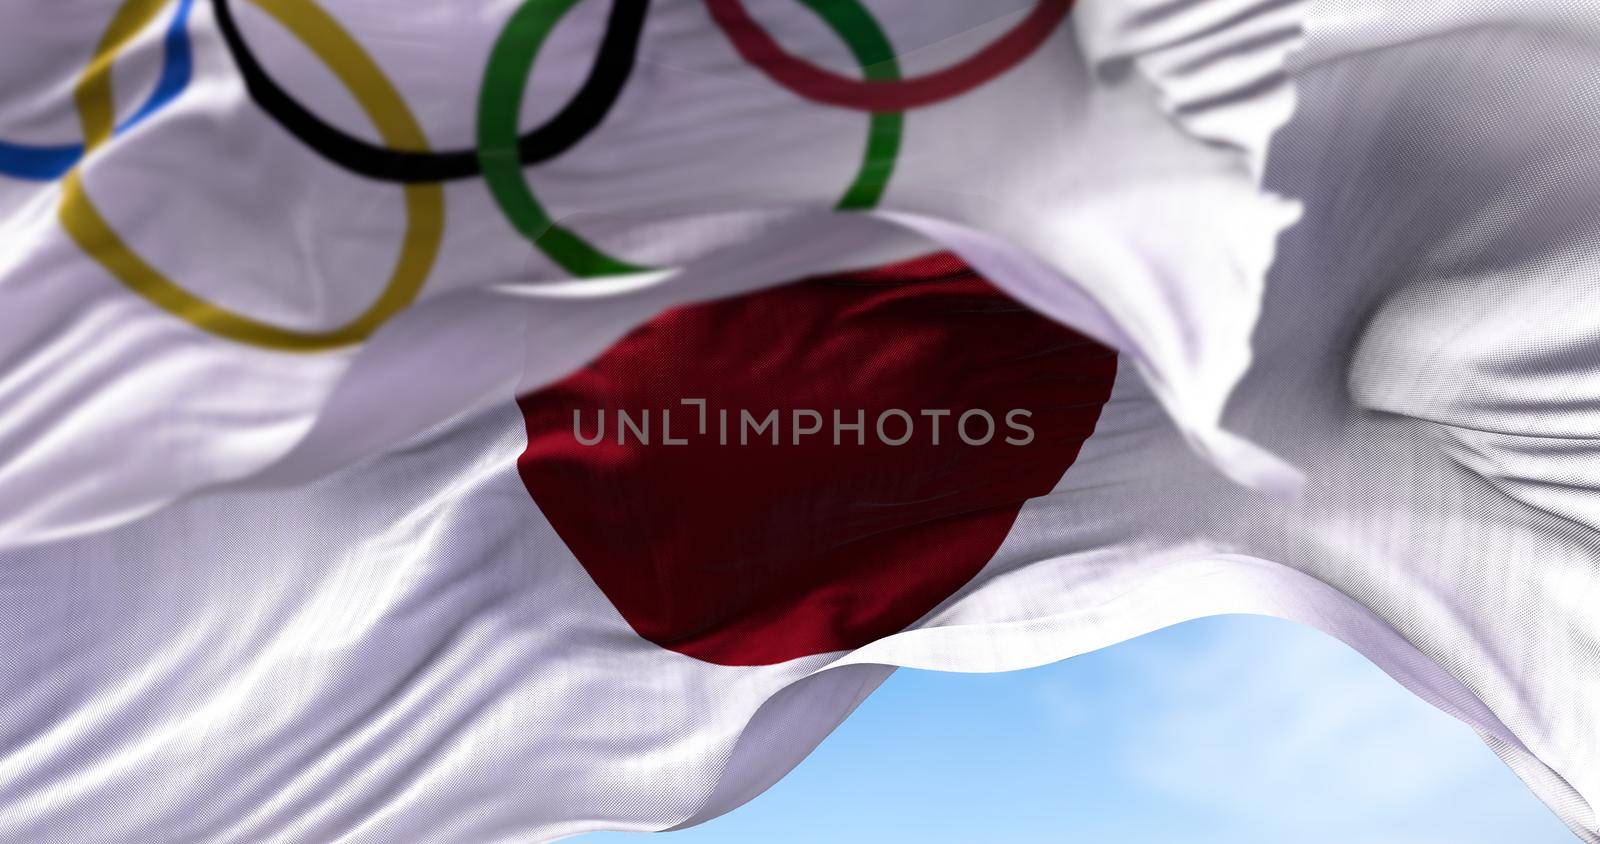 Tokyo, Japan, July 2021: The national flag of Japan waving with the Olympic flag blurred in the foreground. Tokyo 2020 olympics games were postponed to 2021 due to the covid-19 pandemic